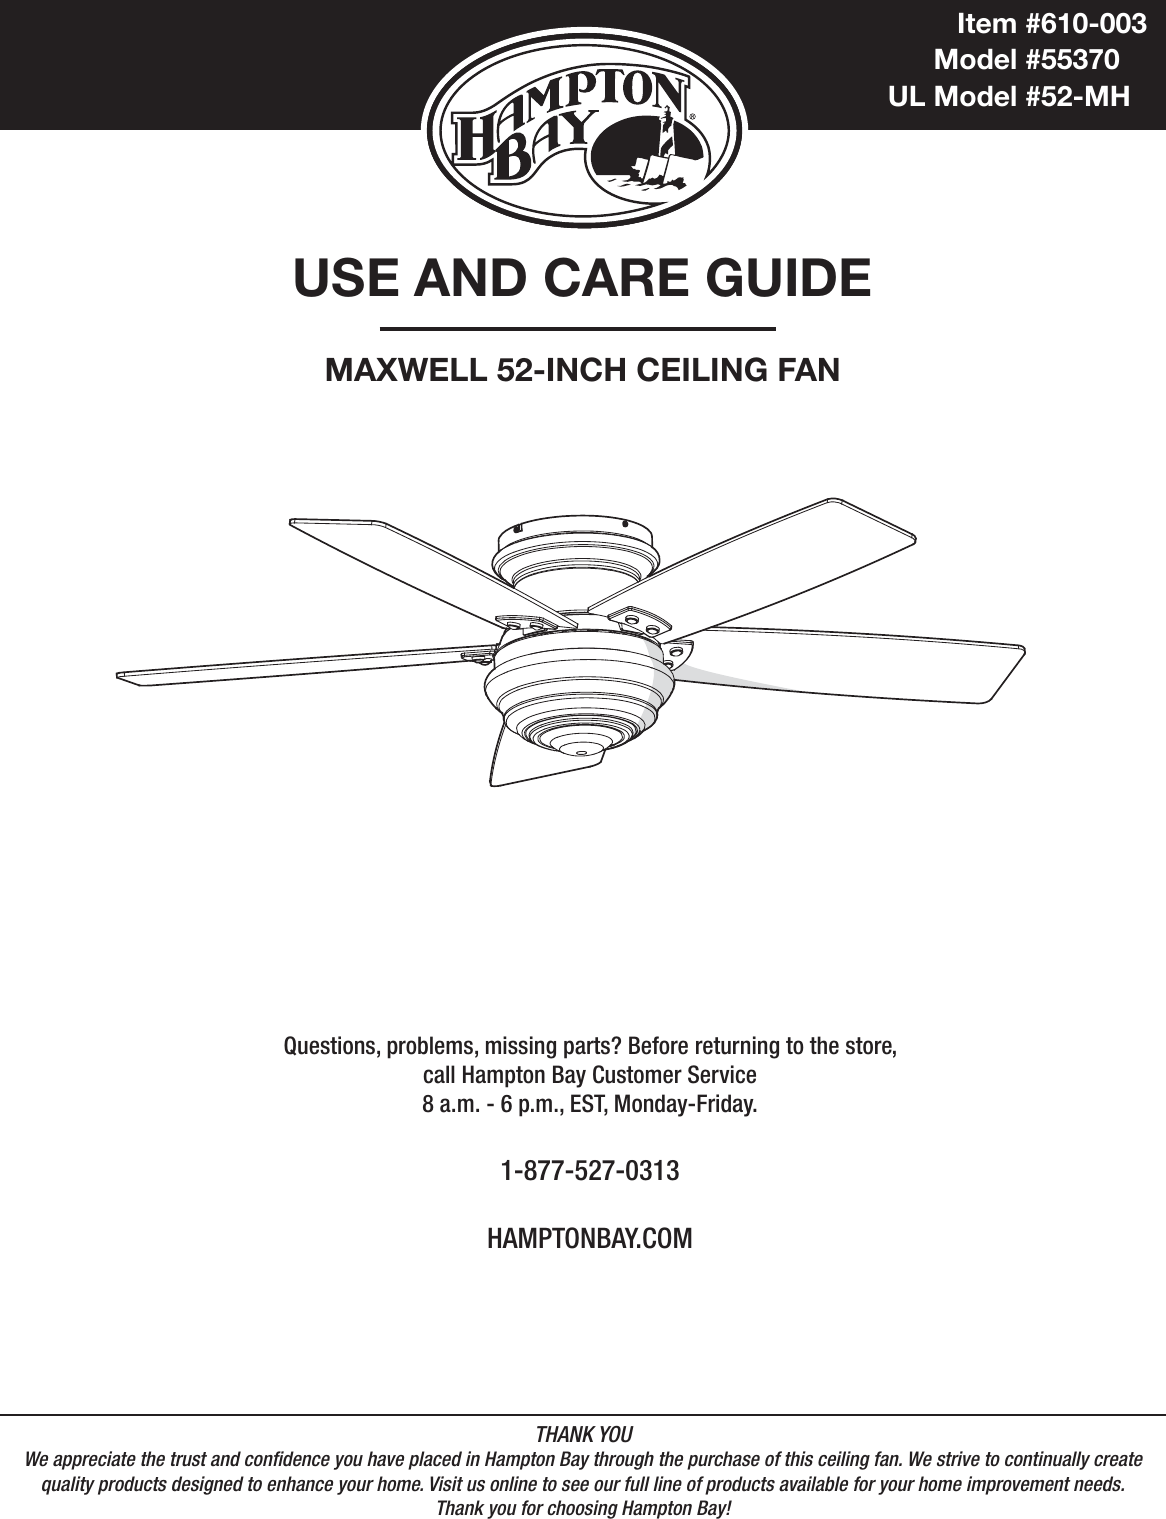 USE AND CARE GUIDEMAXWELL 52-INCH CEILING FANQuestions, problems, missing parts? Before returning to the store,call Hampton Bay Customer Service8 a.m. - 6 p.m., EST, Monday-Friday.1-877-527-0313HAMPTONBAY.COMTHANK YOUWe appreciate the trust and condence you have placed in Hampton Bay through the purchase of this ceiling fan. We strive to continually createquality products designed to enhance your home. Visit us online to see our full line of products available for your home improvement needs. Thank you for choosing Hampton Bay!              Item #610-003           Model #55370UL Model #52-MH